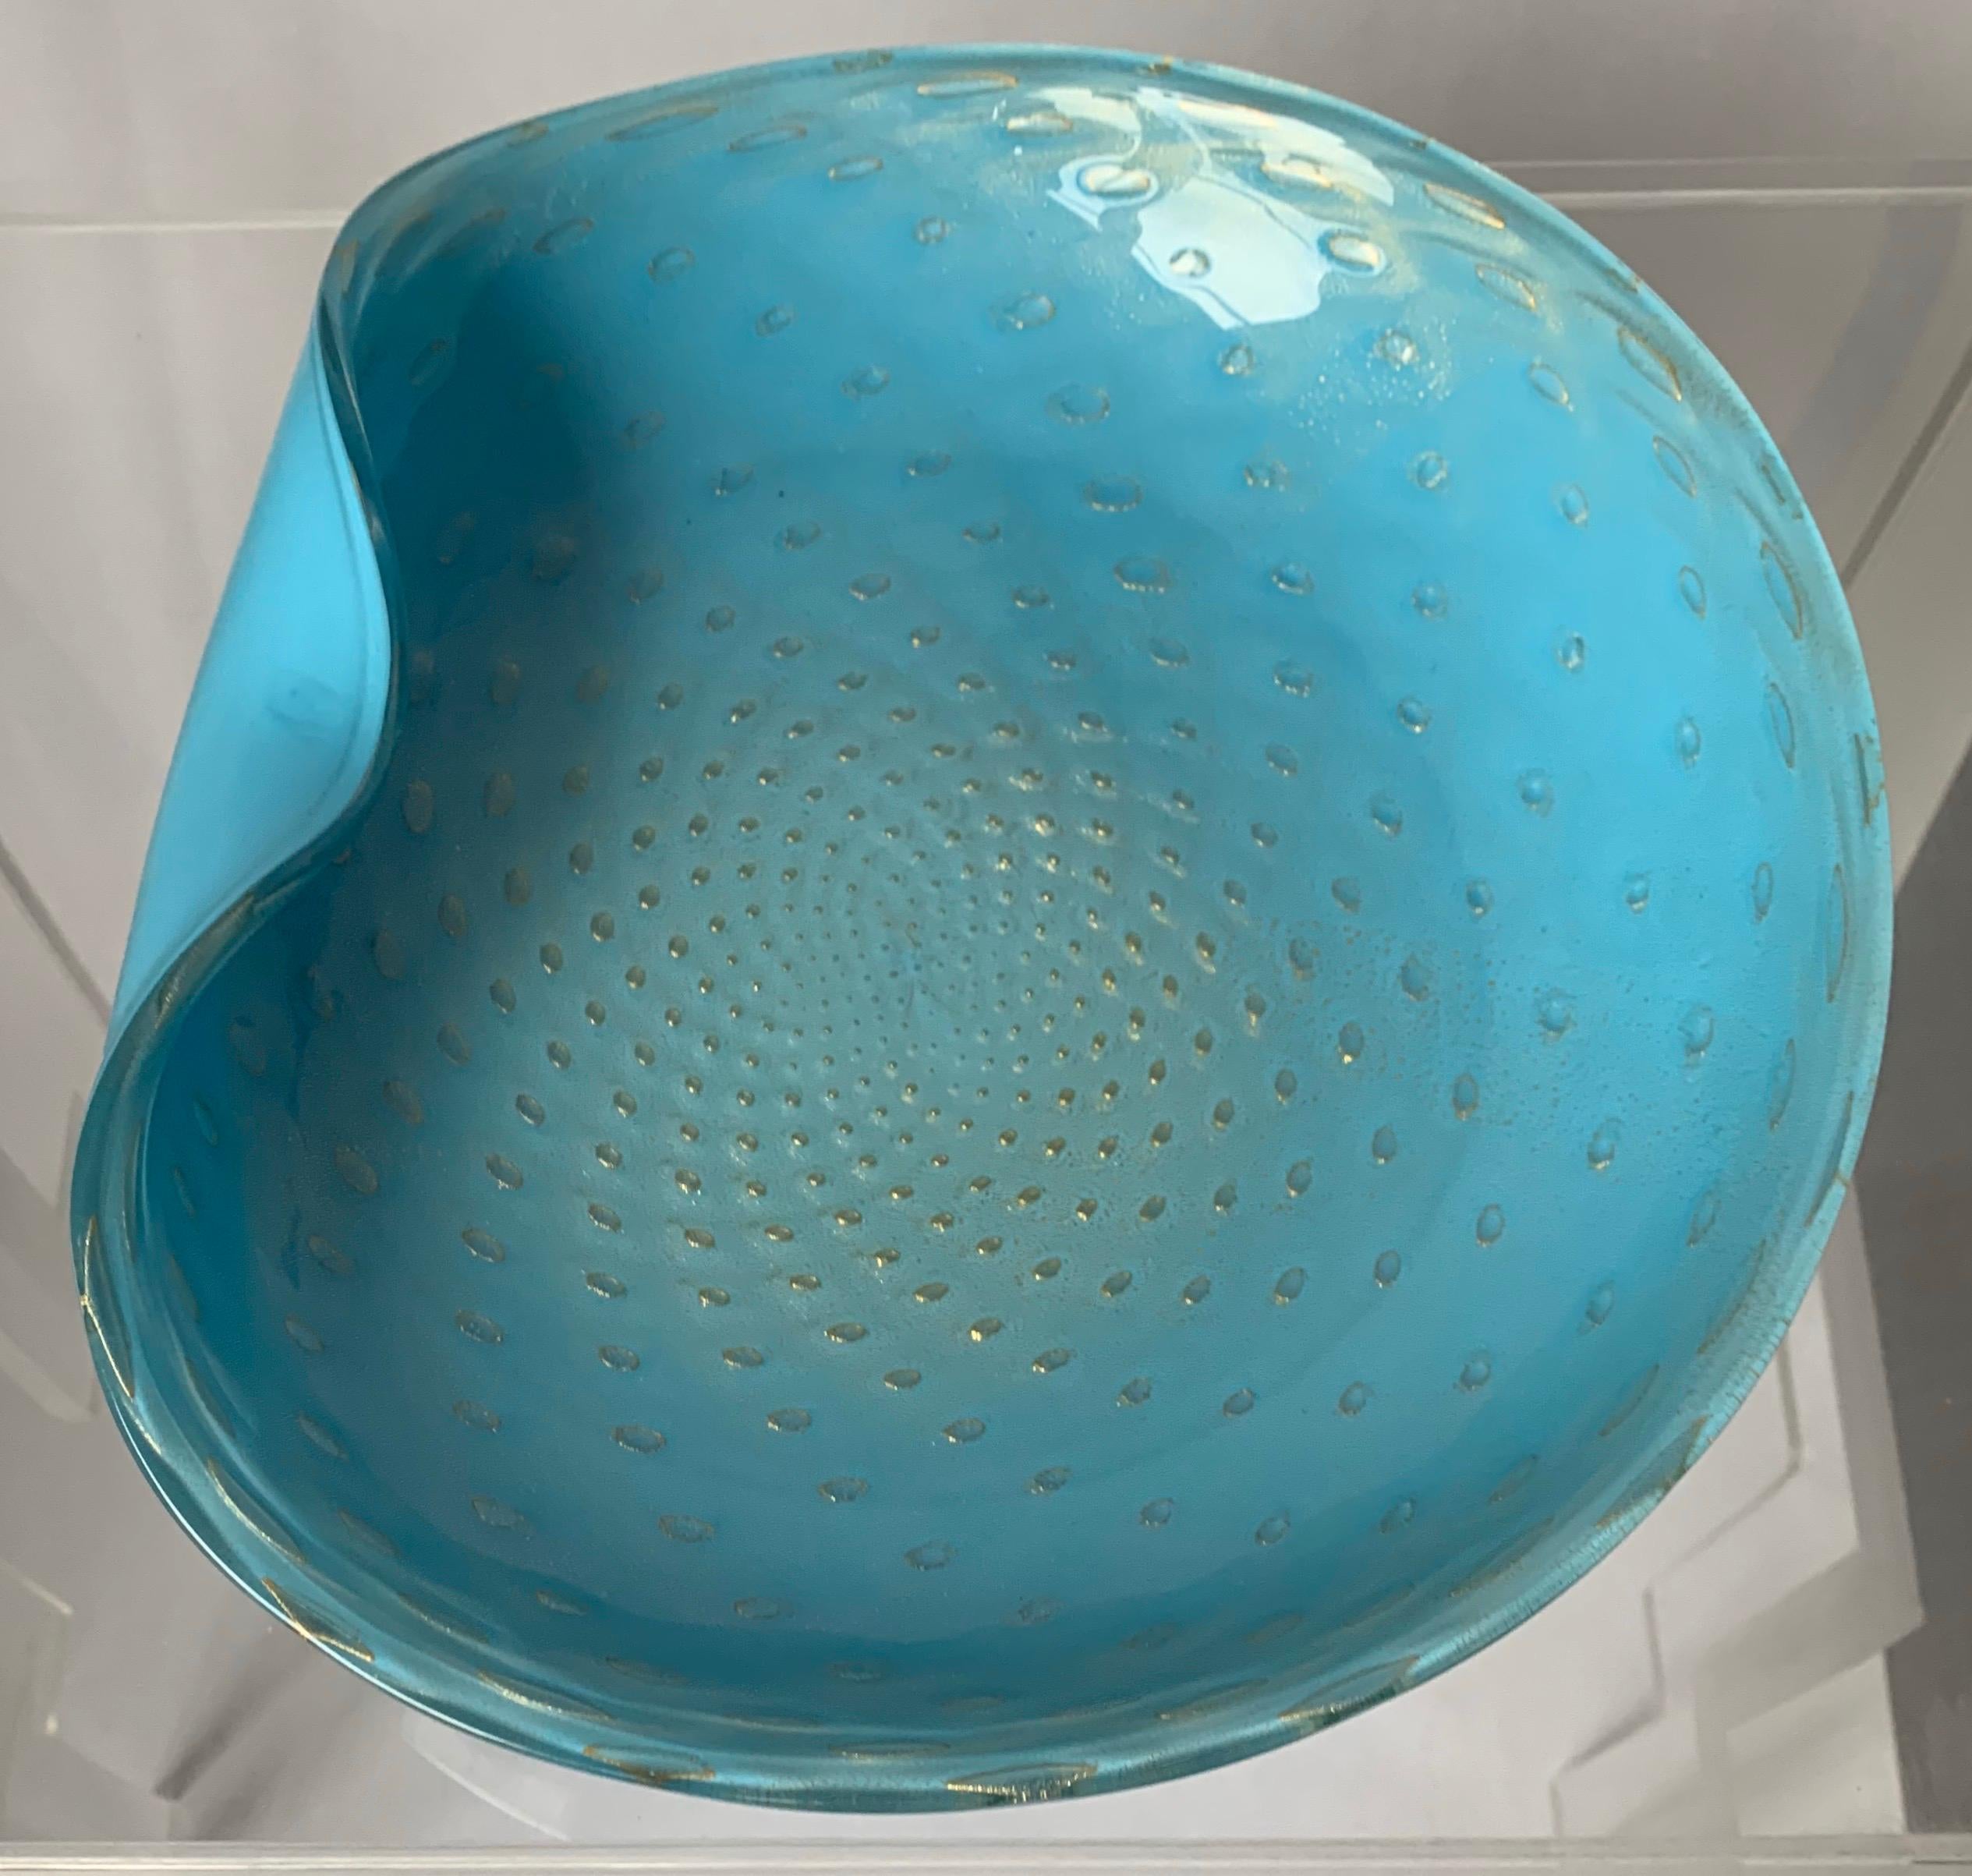 Large midcentury Murano glass ashtray by Barbini. Robins egg blue with all-over bullicante (controlled bubbles) and gold flecks.